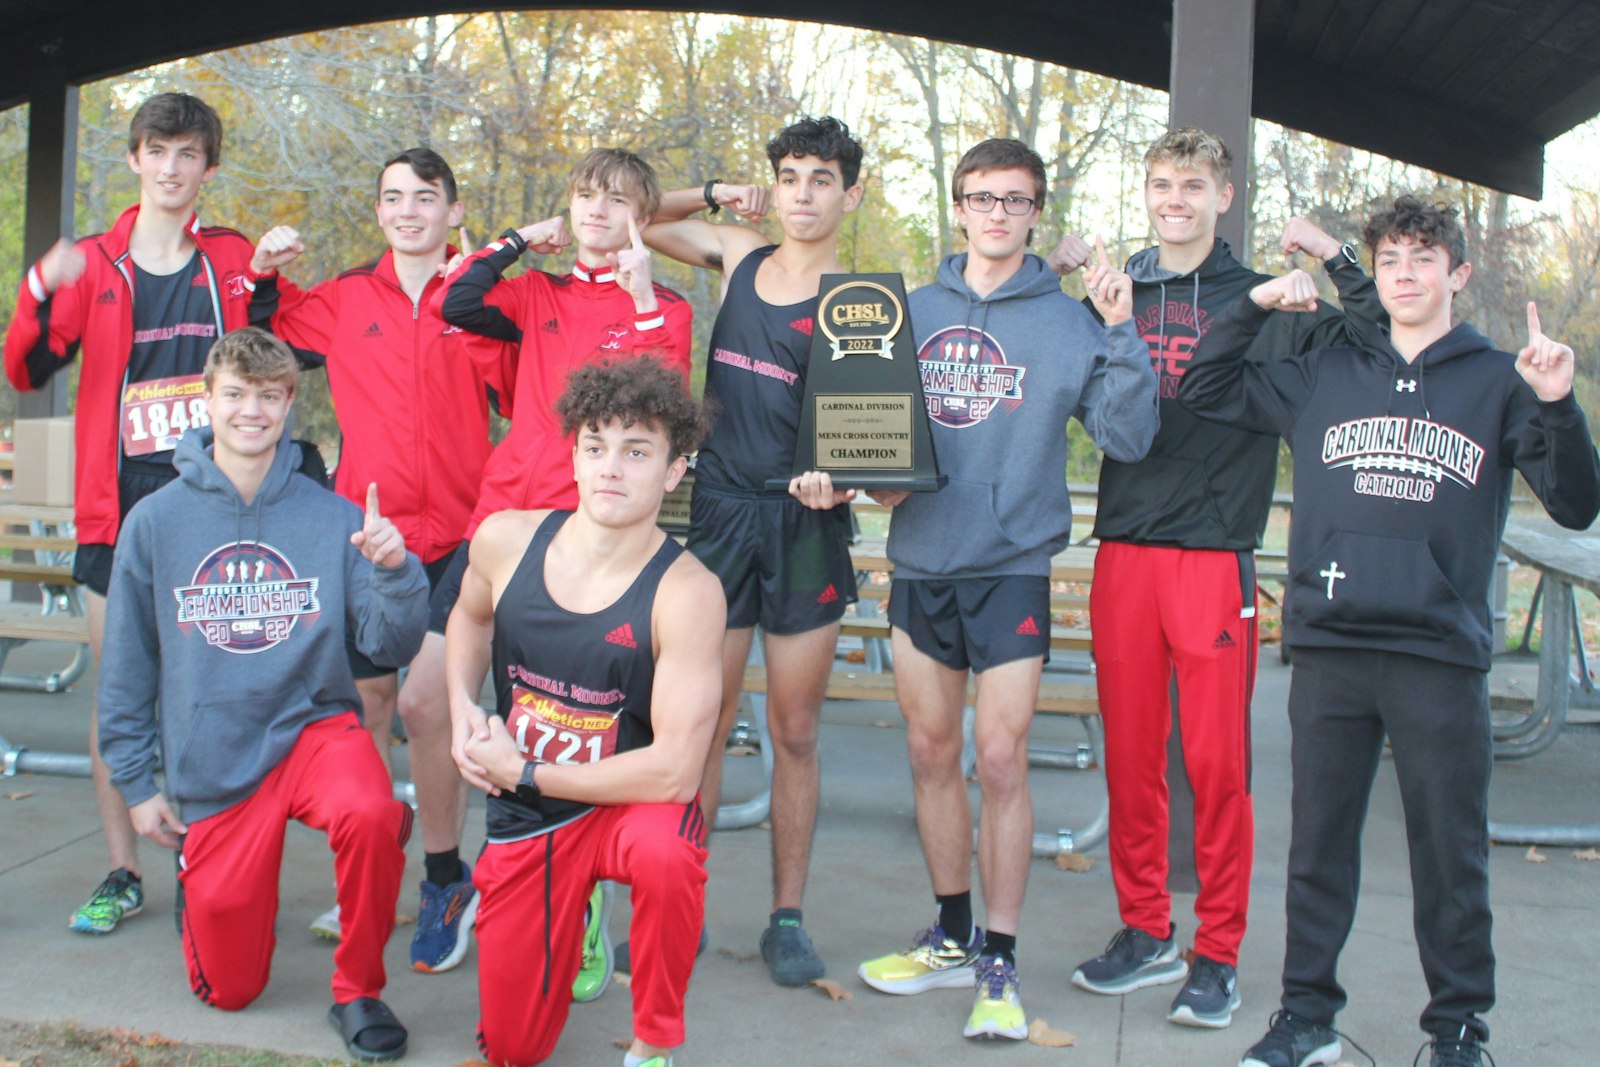 Marine City Cardinal Mooney celebrates its first cross-country championship. The Cardinals finished ahead of 10 other schools in the Cardinal Division race at Willow Metropark.